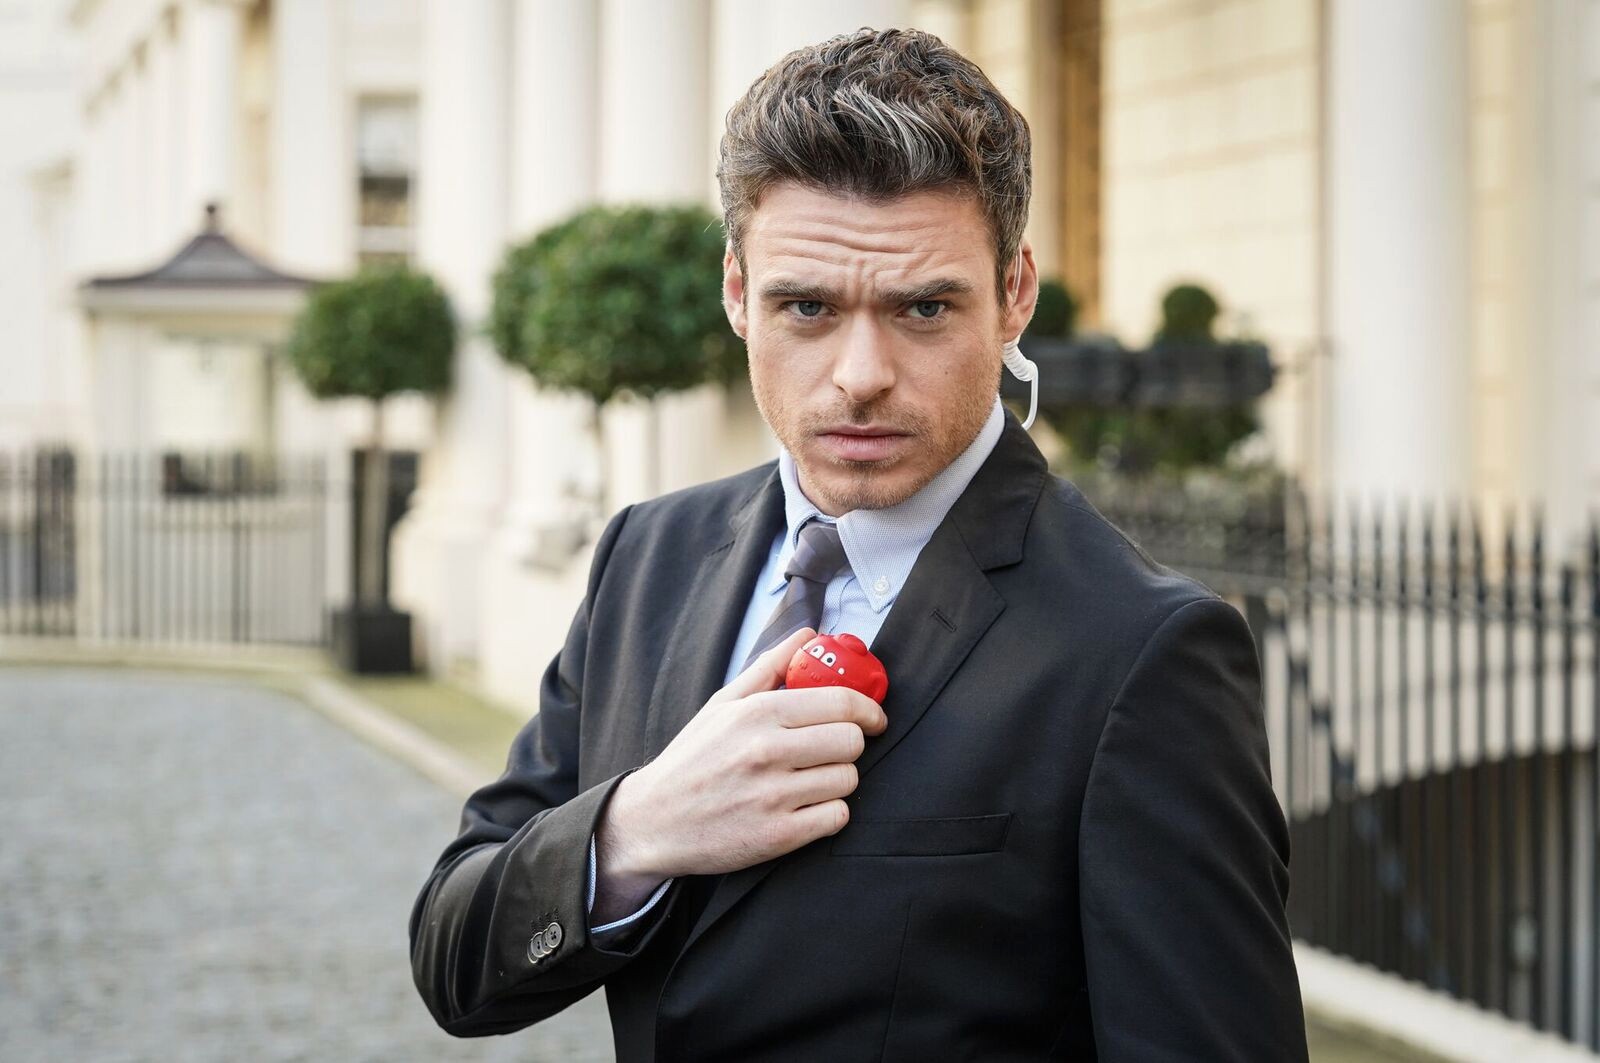 No one really knew who Richard Madden was until he starred in The Bodyguard